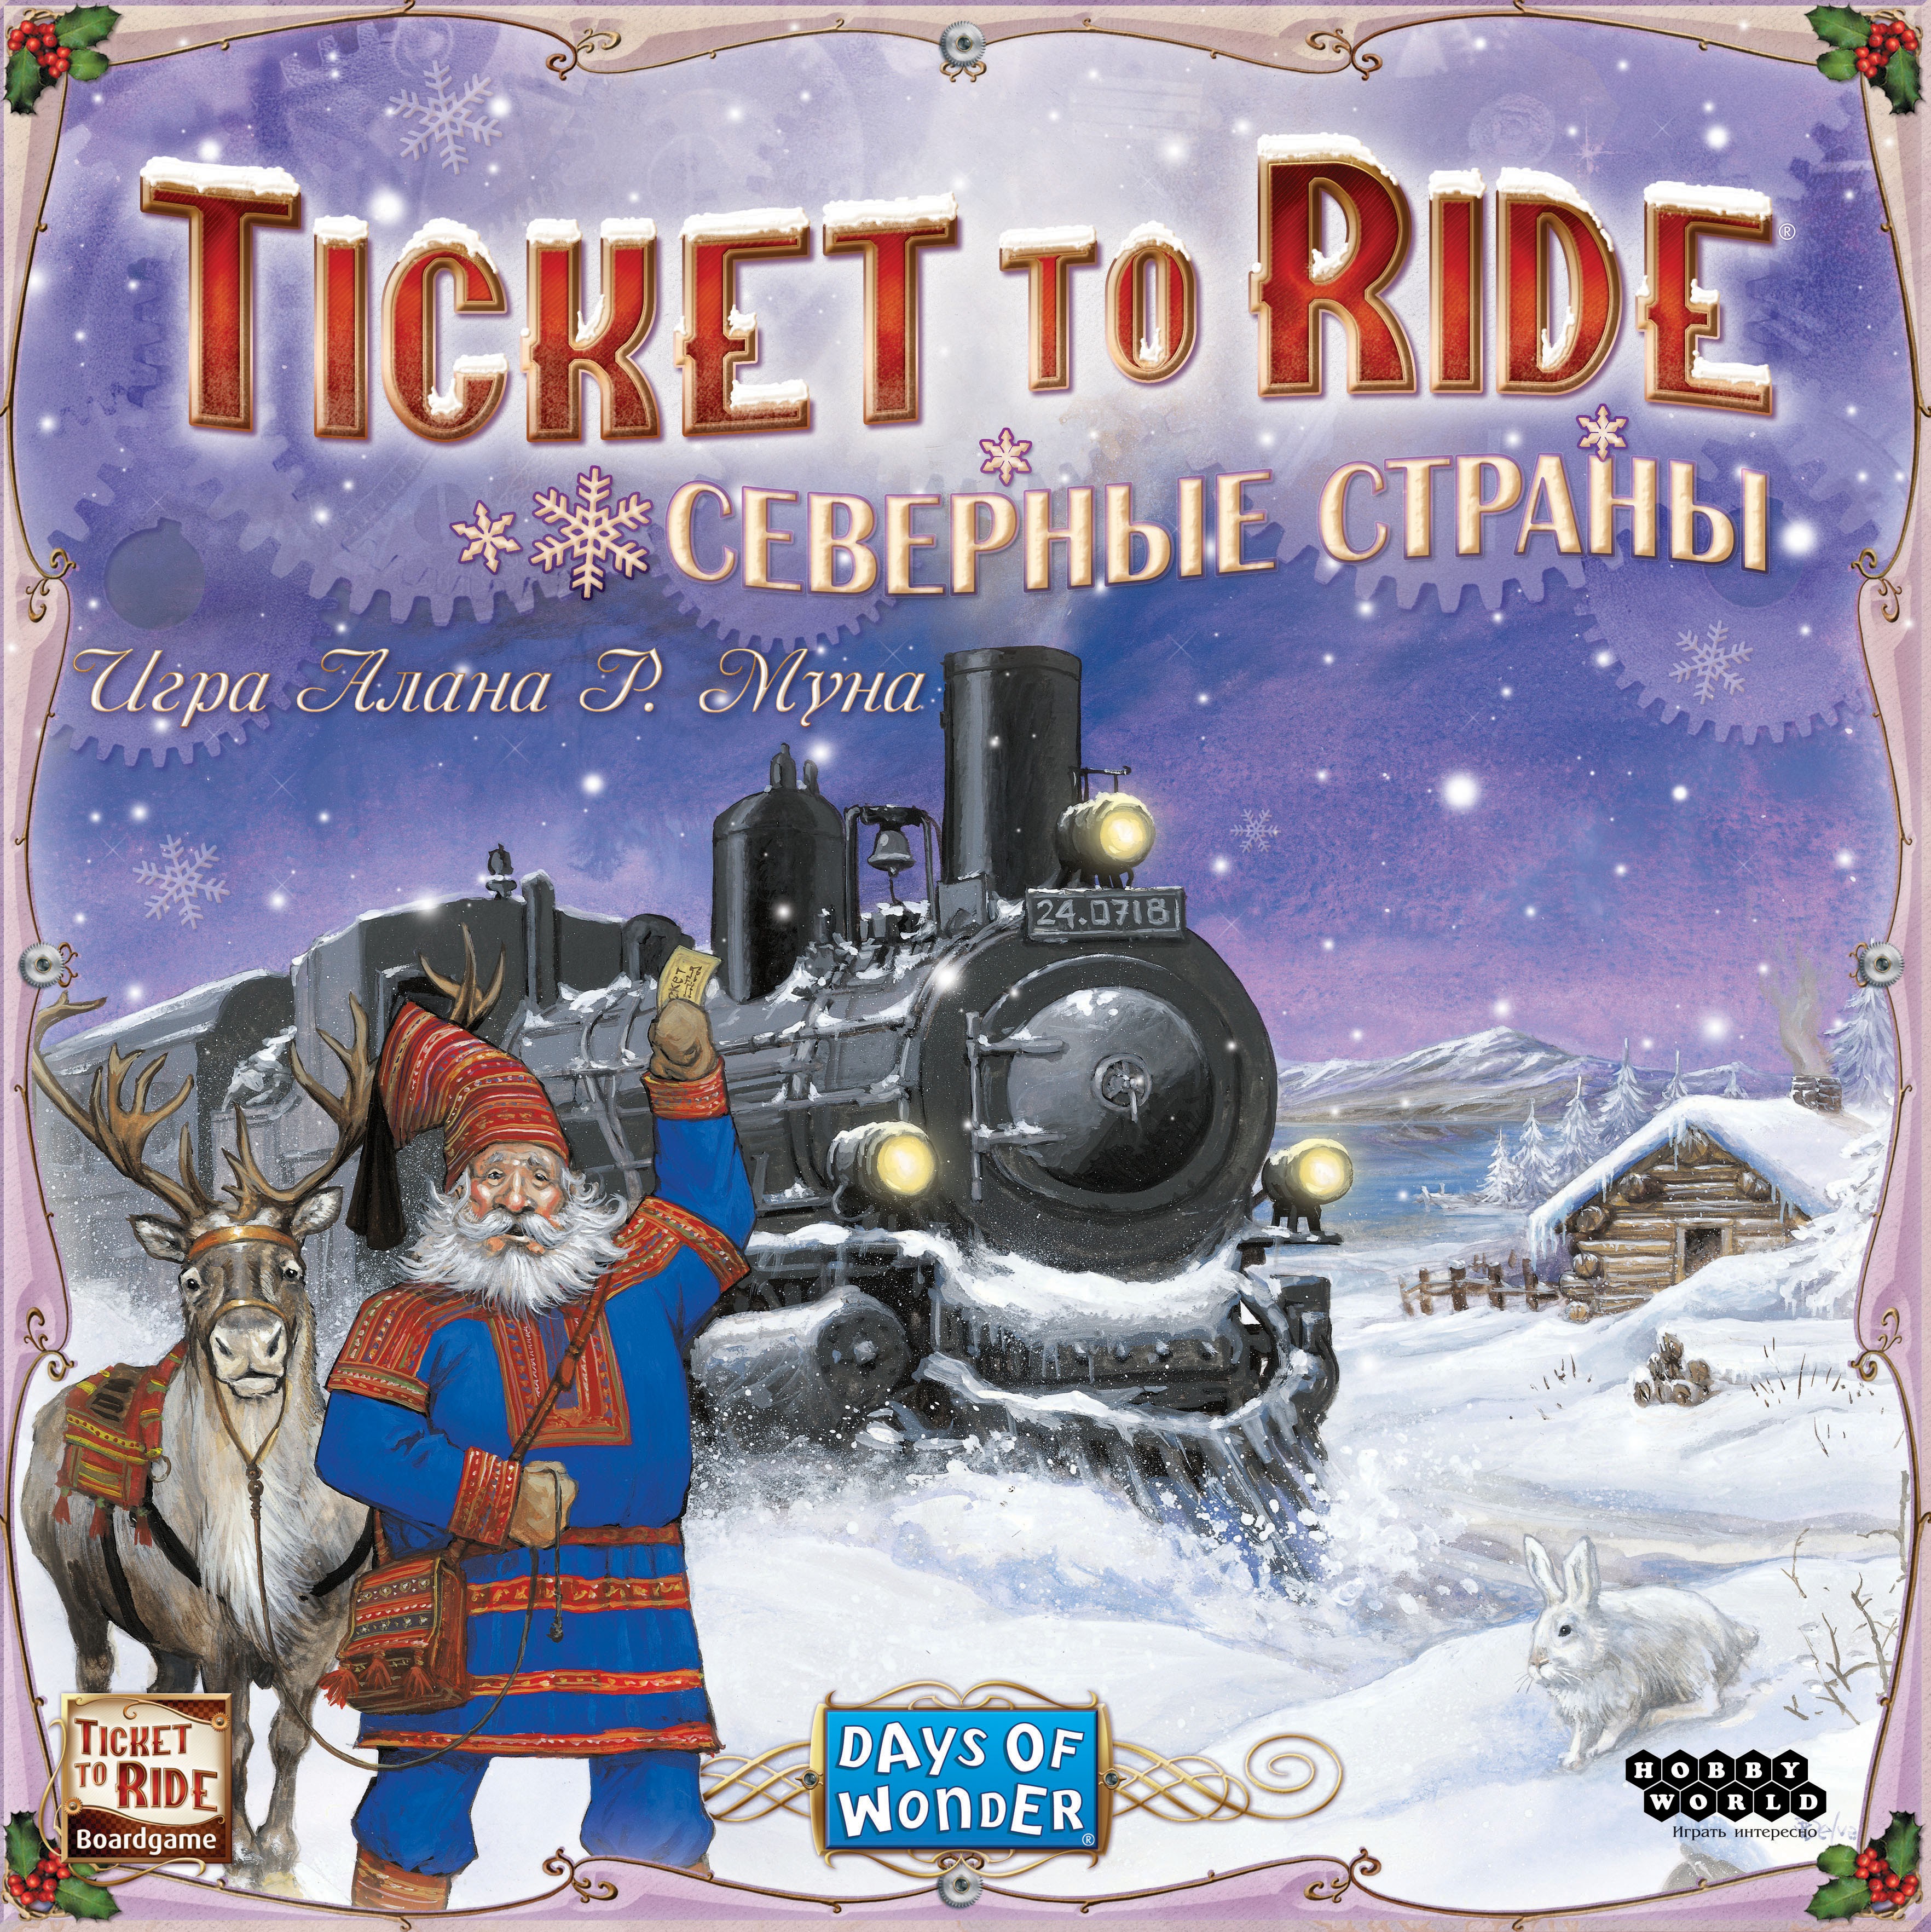 Ticket-to-ride_Nordic_box_front